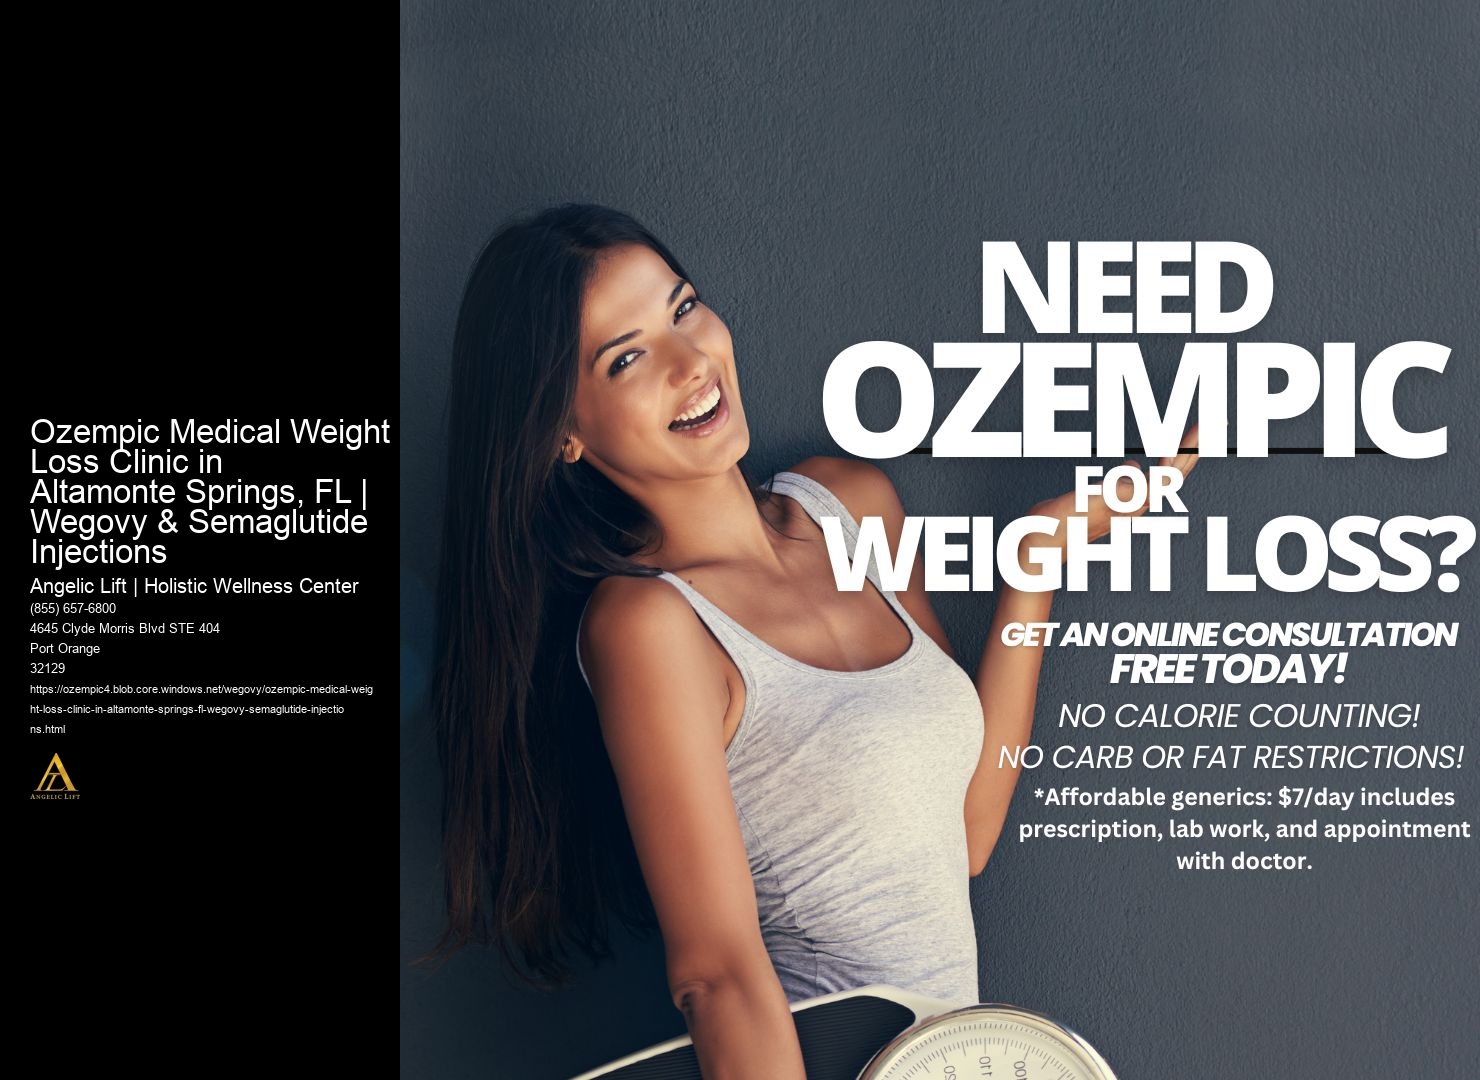 Ozempic Medical Weight Loss Clinic in Altamonte Springs, FL | Wegovy & Semaglutide Injections